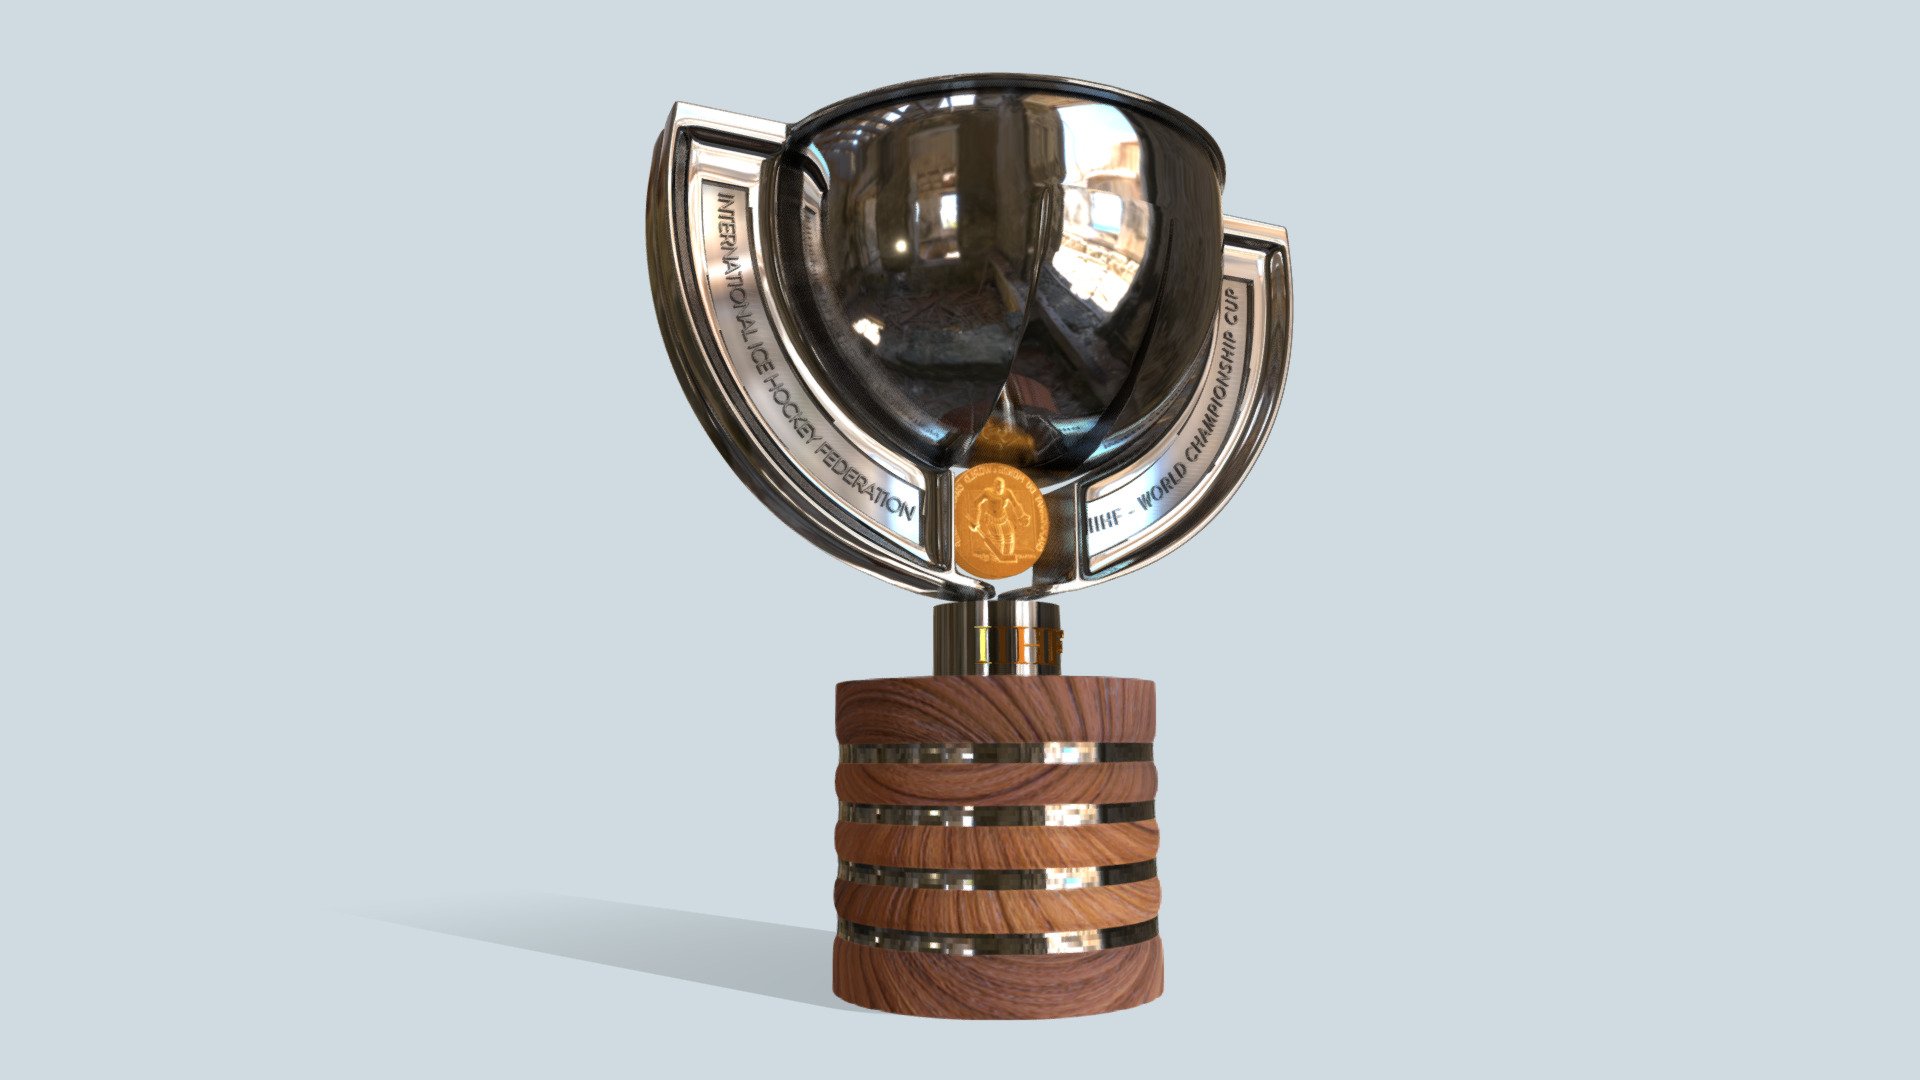 In 2021 the fight is on. The Championship tournament will be held in Riga, Latvia. Teams fighting for the trophy of IIHF, let the best team win 3d model